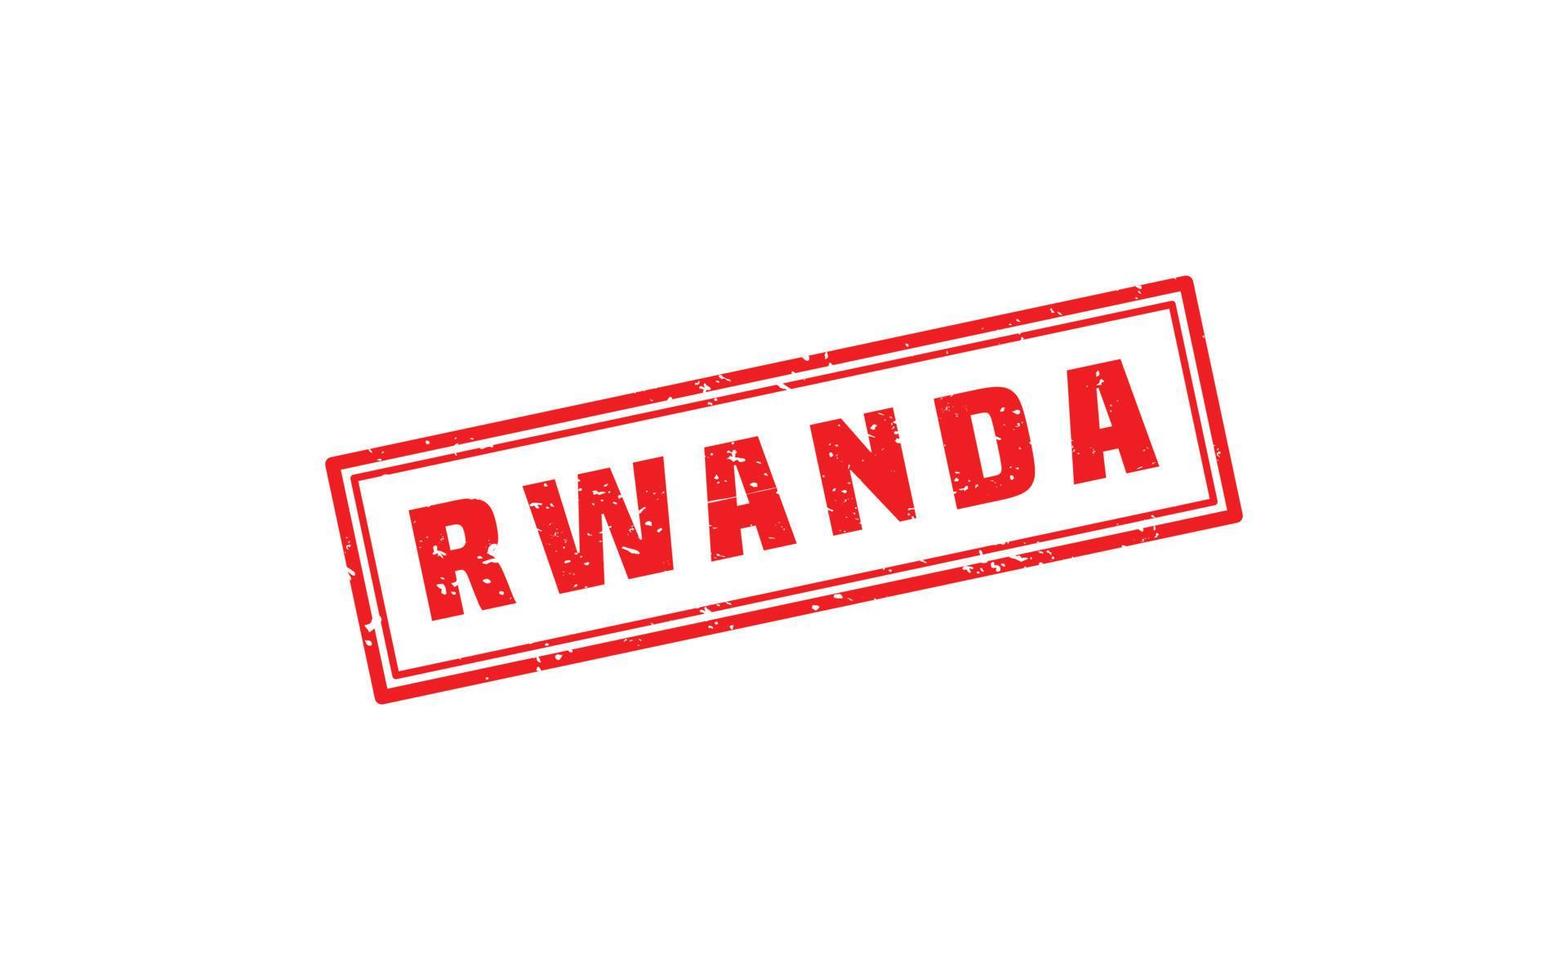 RWANDA stamp rubber with grunge style on white background vector